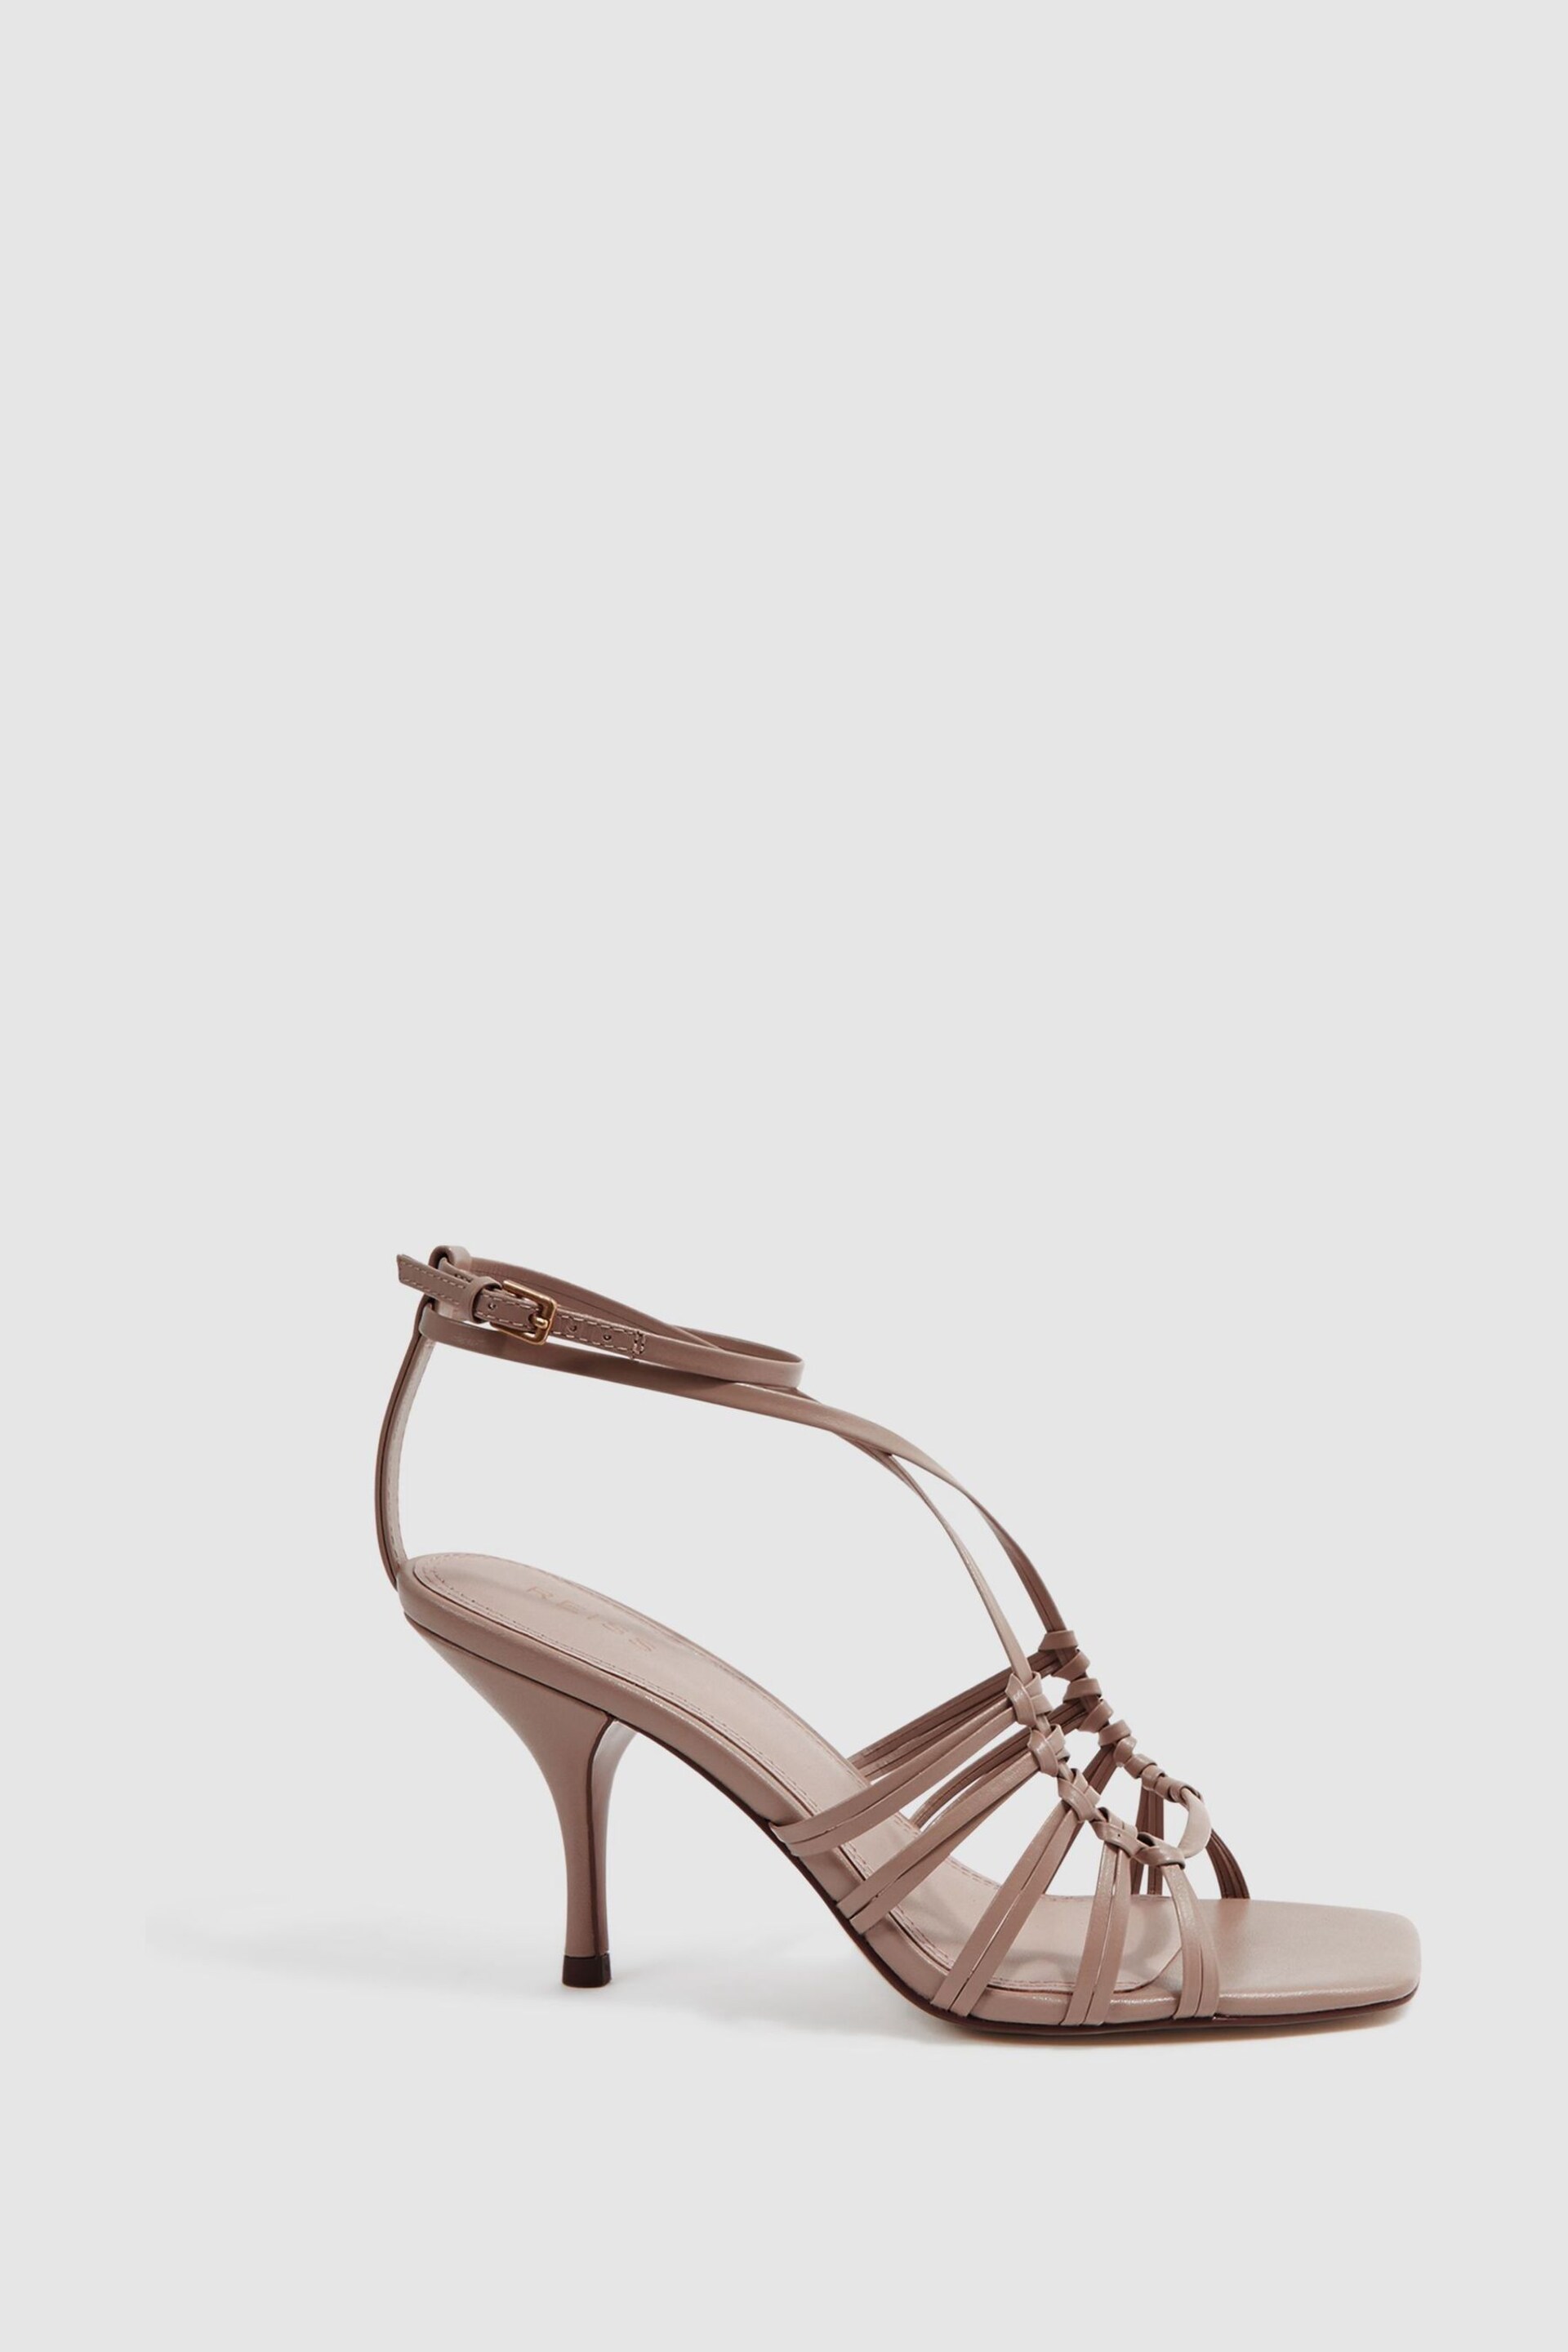 Reiss Taupe Eva Leather Strappy Heels - Image 1 of 4